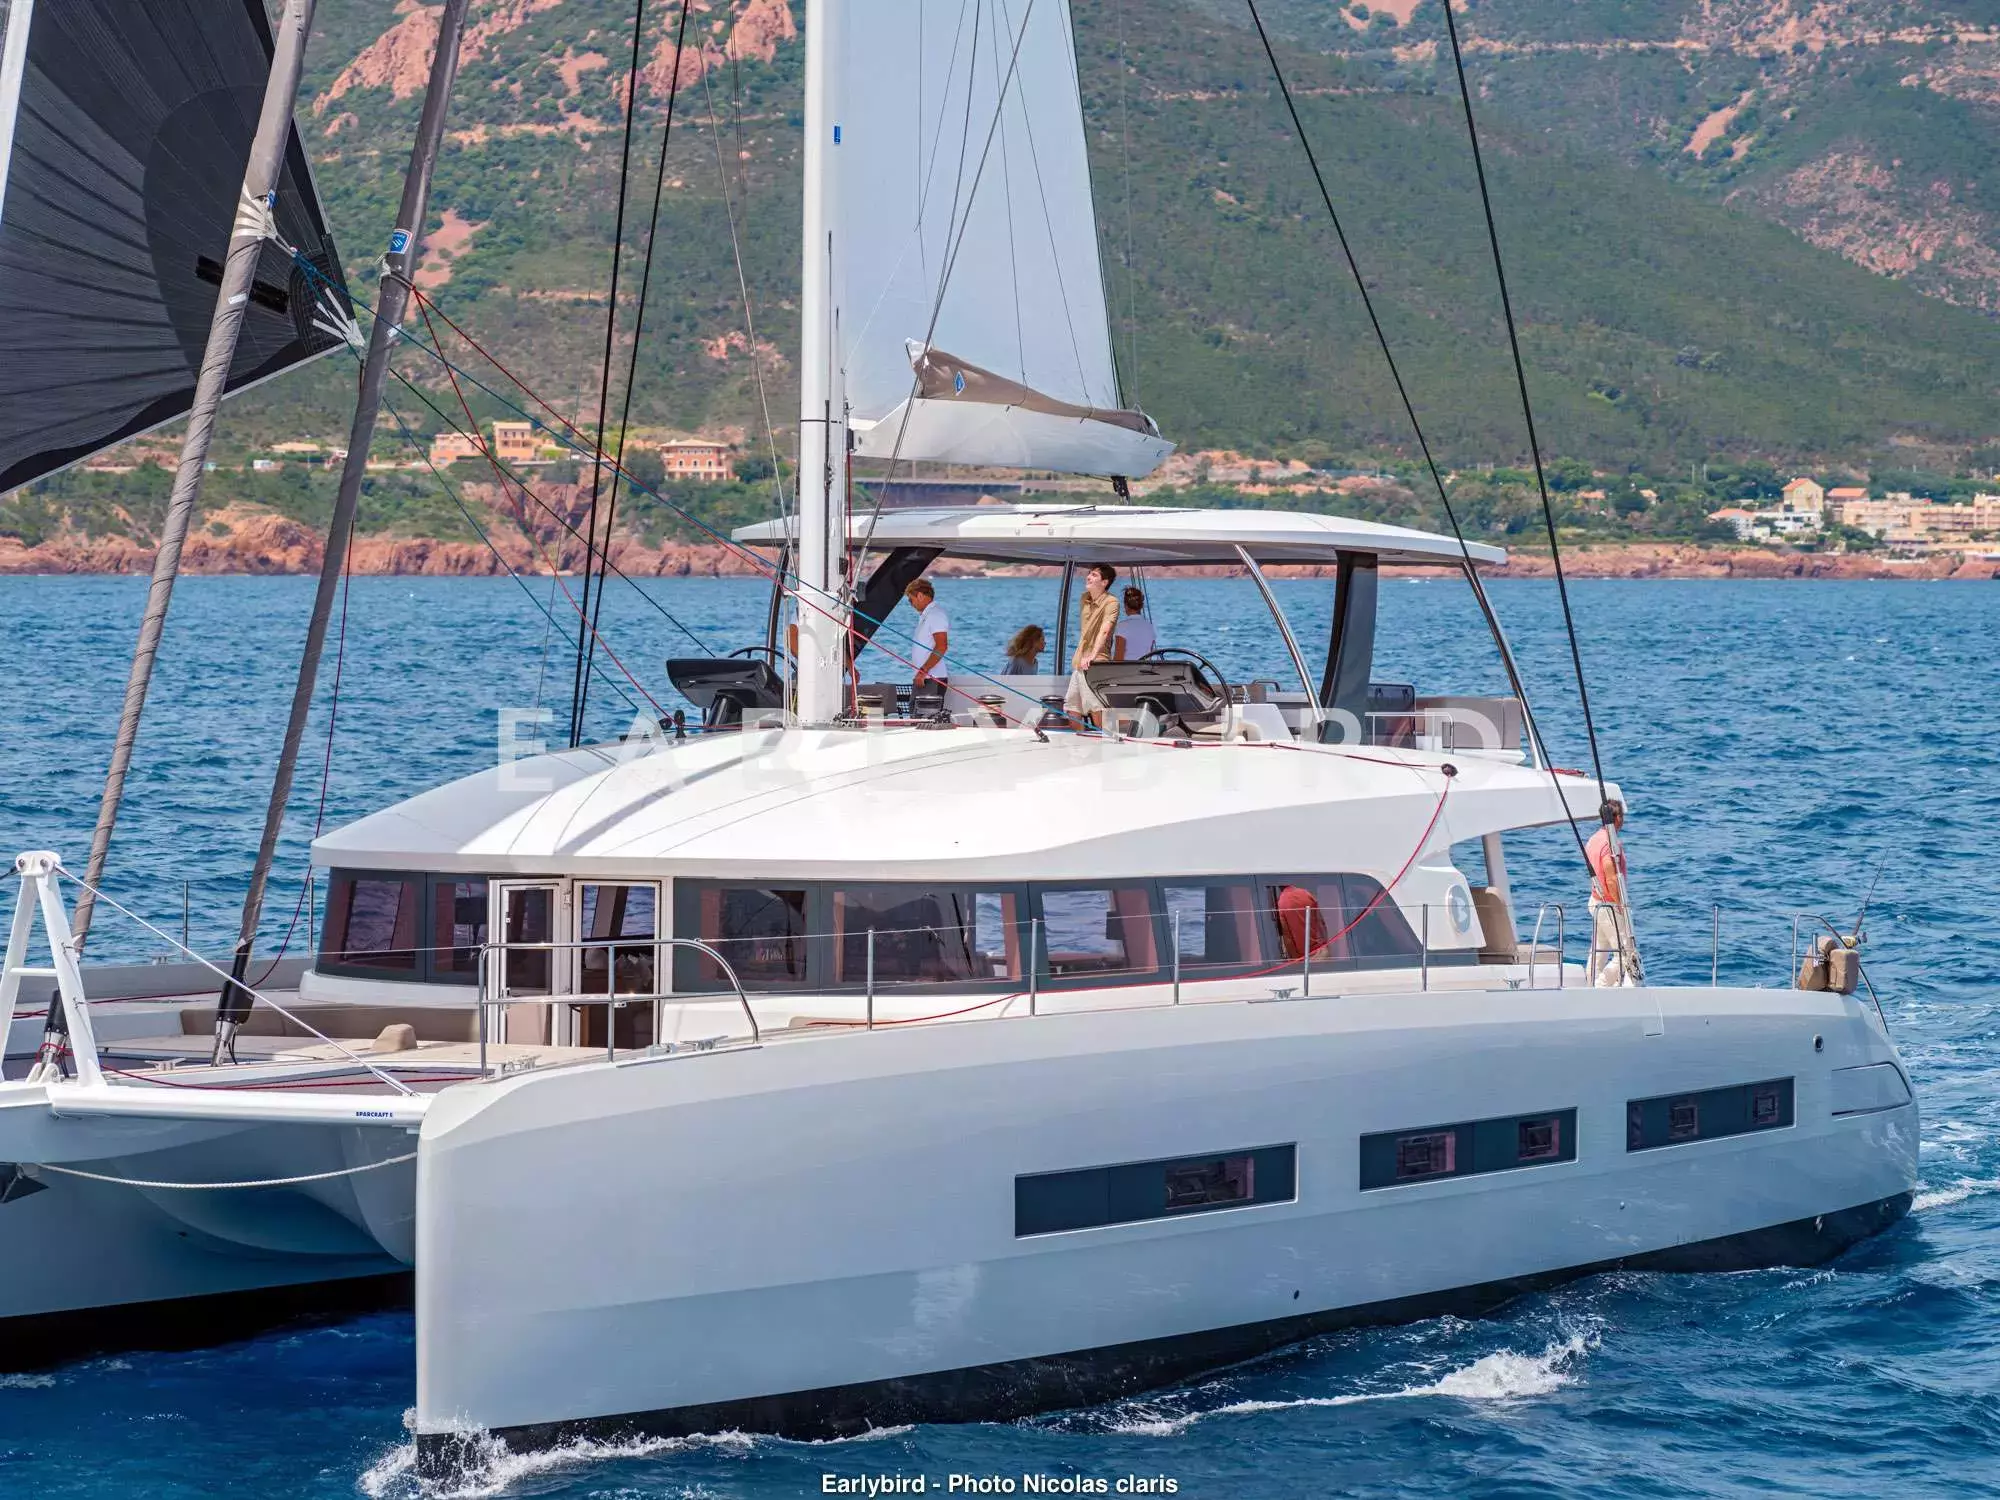 Earlybird by Lagoon - Top rates for a Charter of a private Luxury Catamaran in Barbados